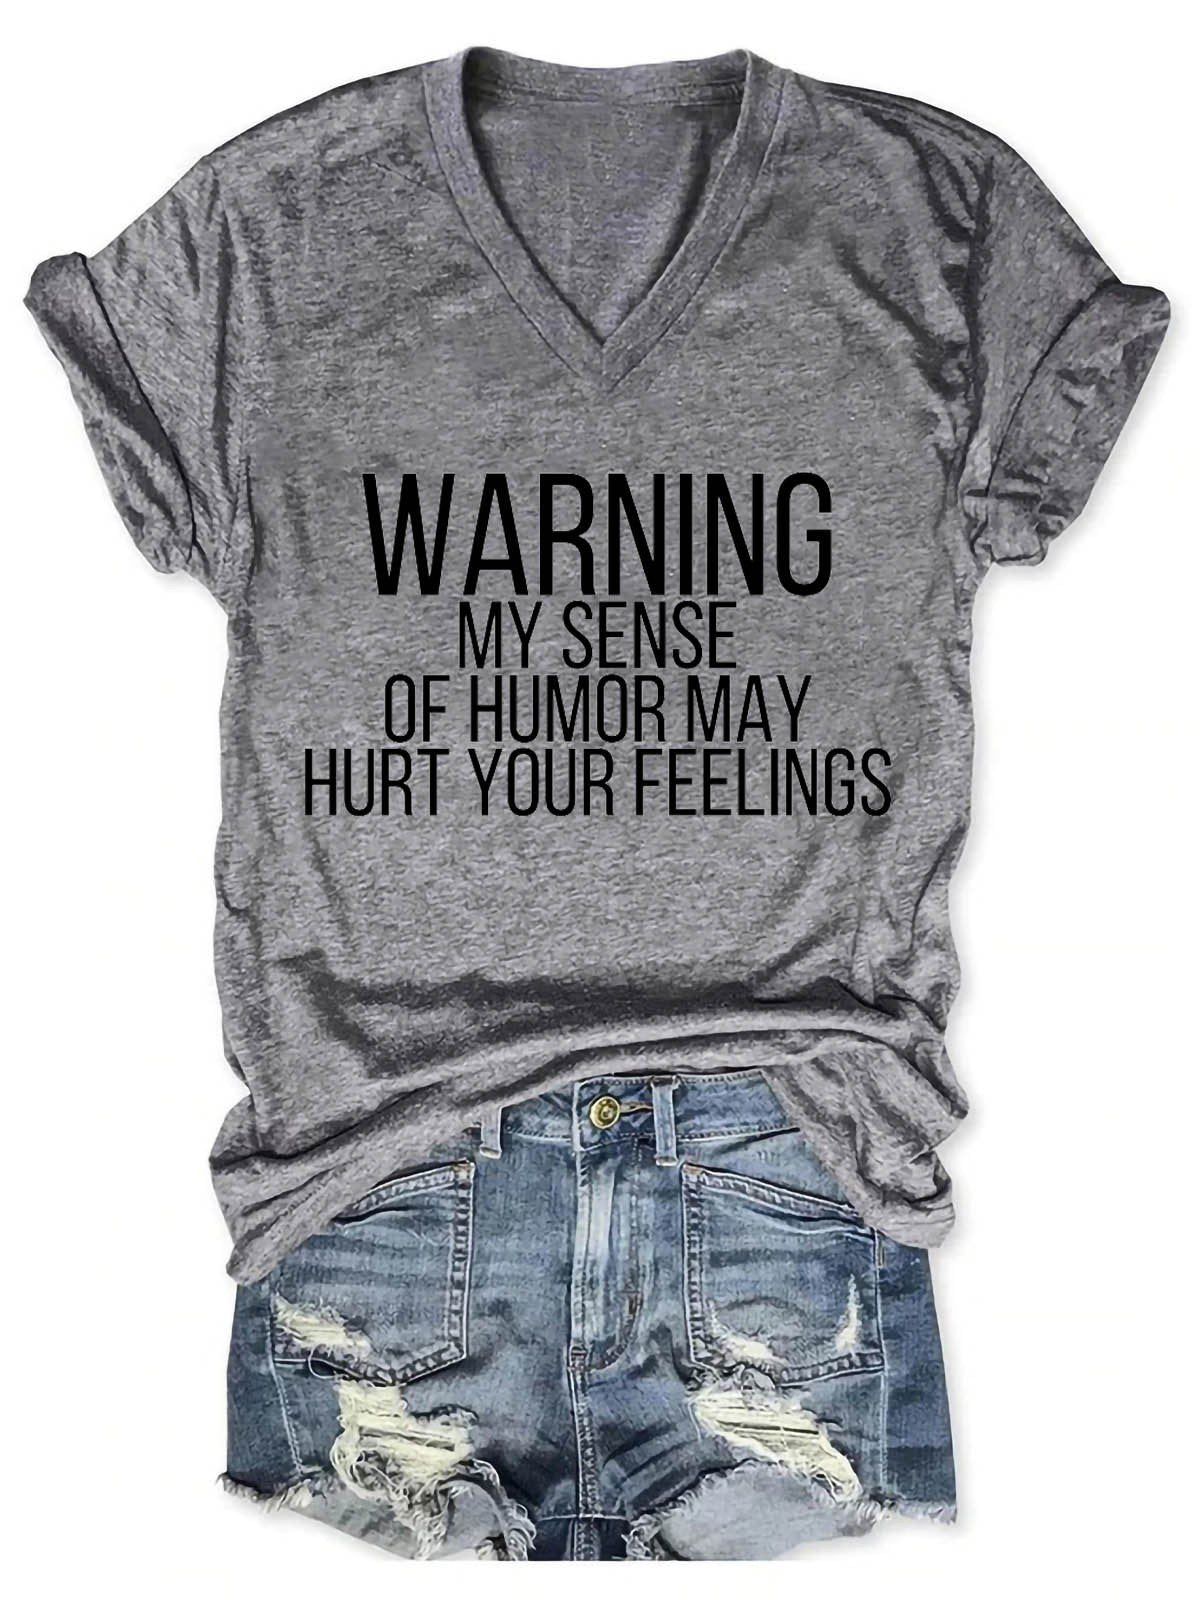 Women's Warning My Sens Of Humor May Hurt Your Feelings V-Neck T-Shirt - Outlets Forever